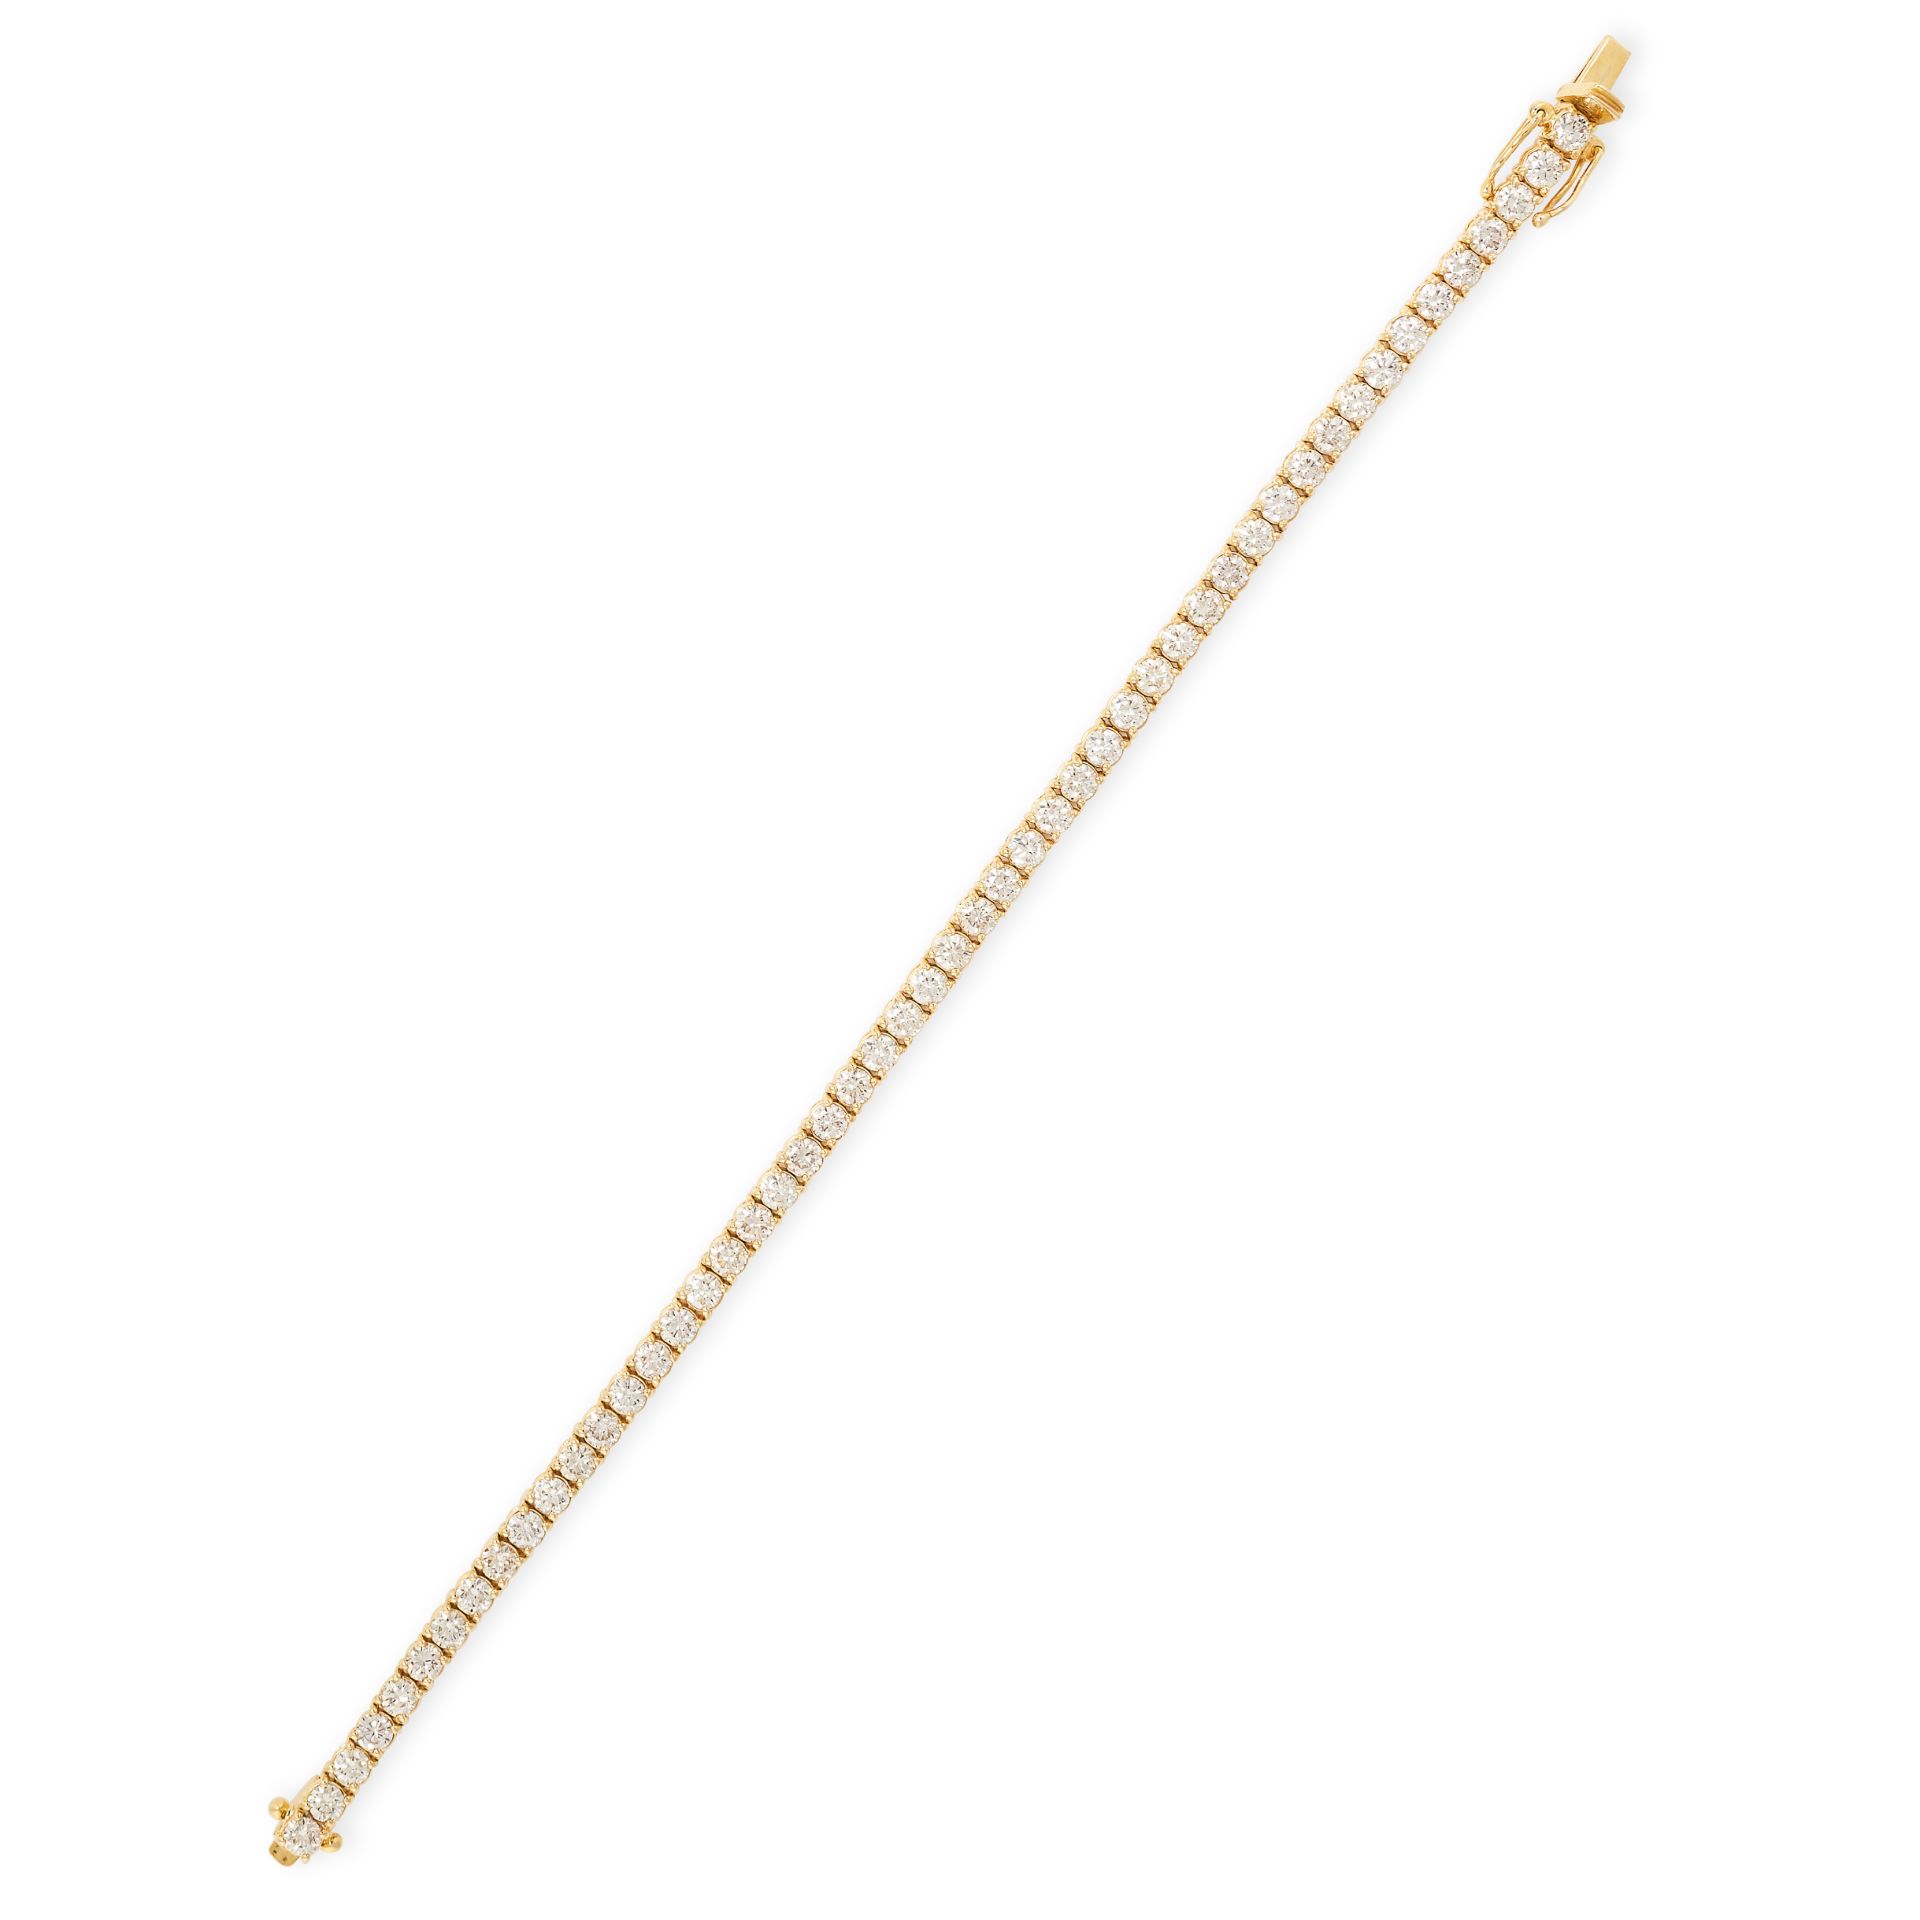 A 6.90 CARAT DIAMOND LINE BRACELET in 18ct yellow gold, set with a single row of fifty-one round